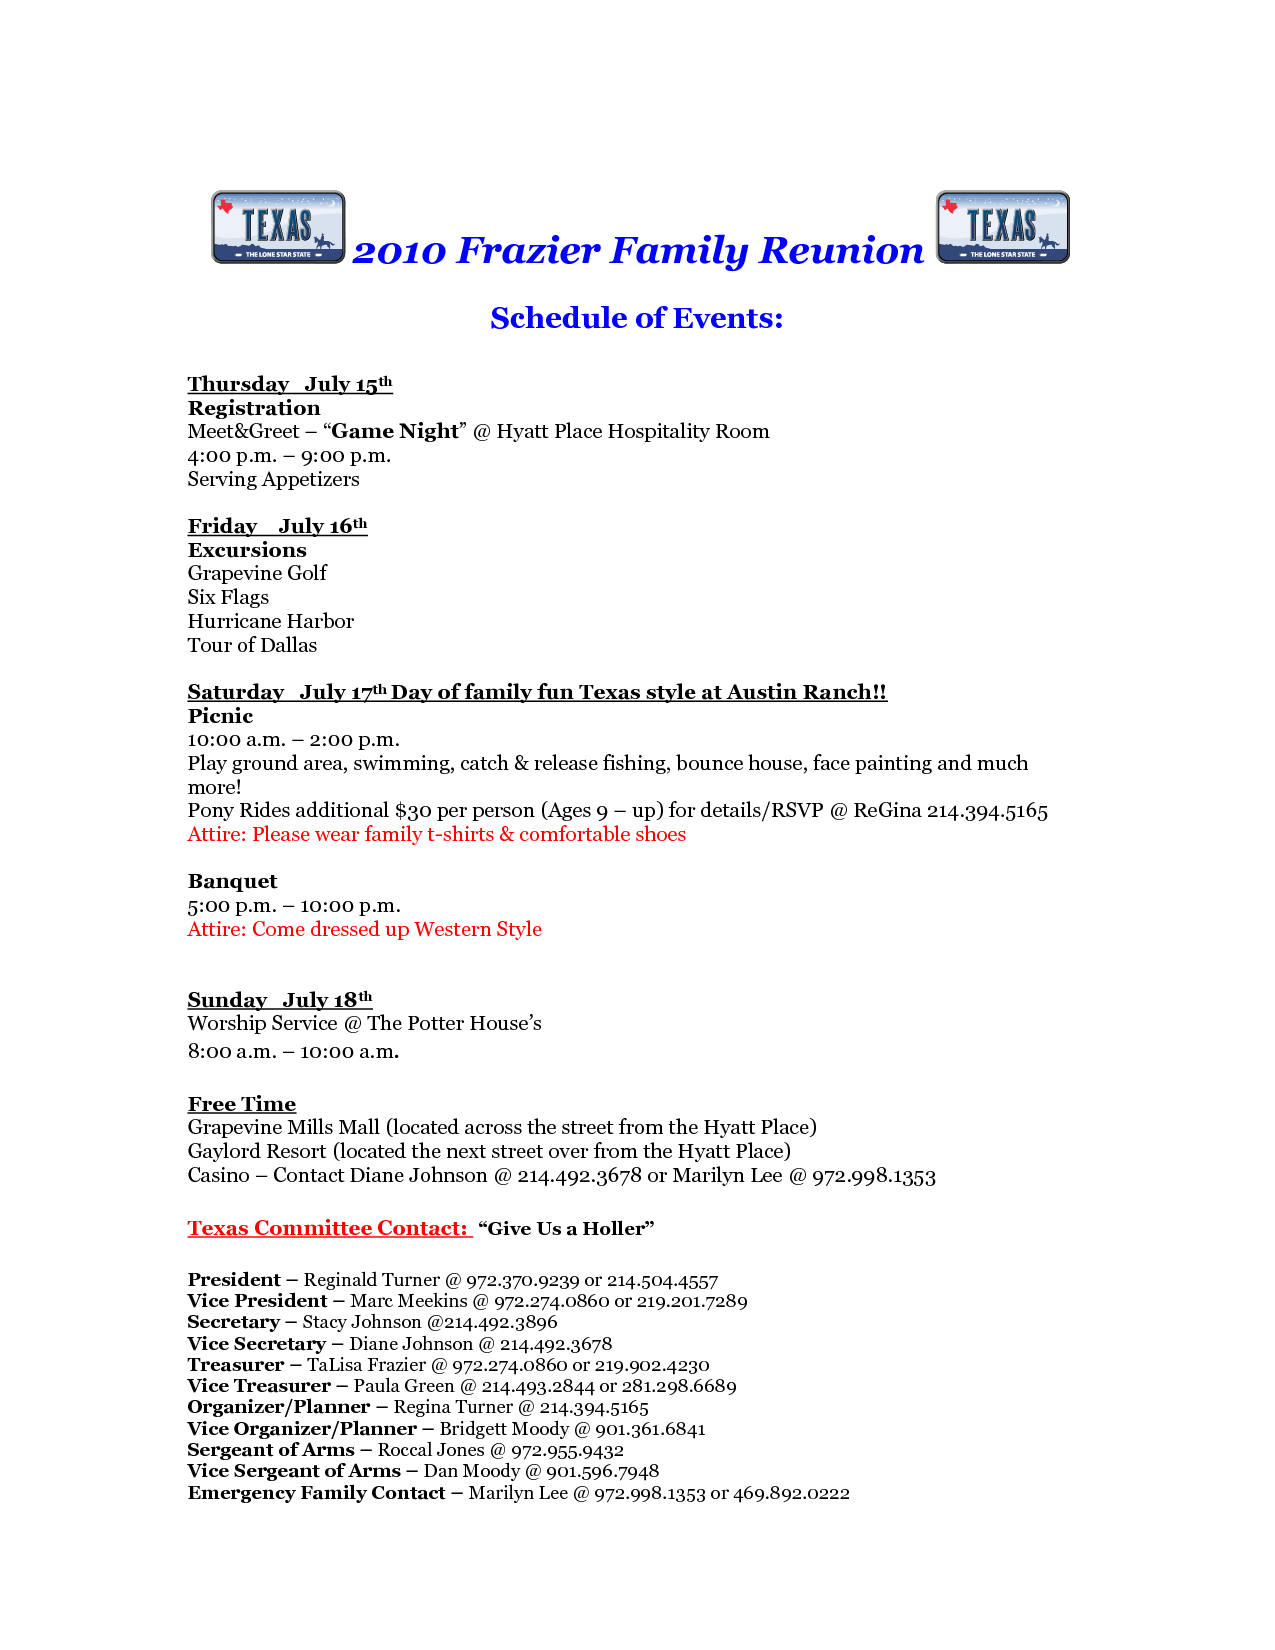 Free Printable Family Reunion Letters   Frazier Family Reunion for Free Family Reunion Letter Templates